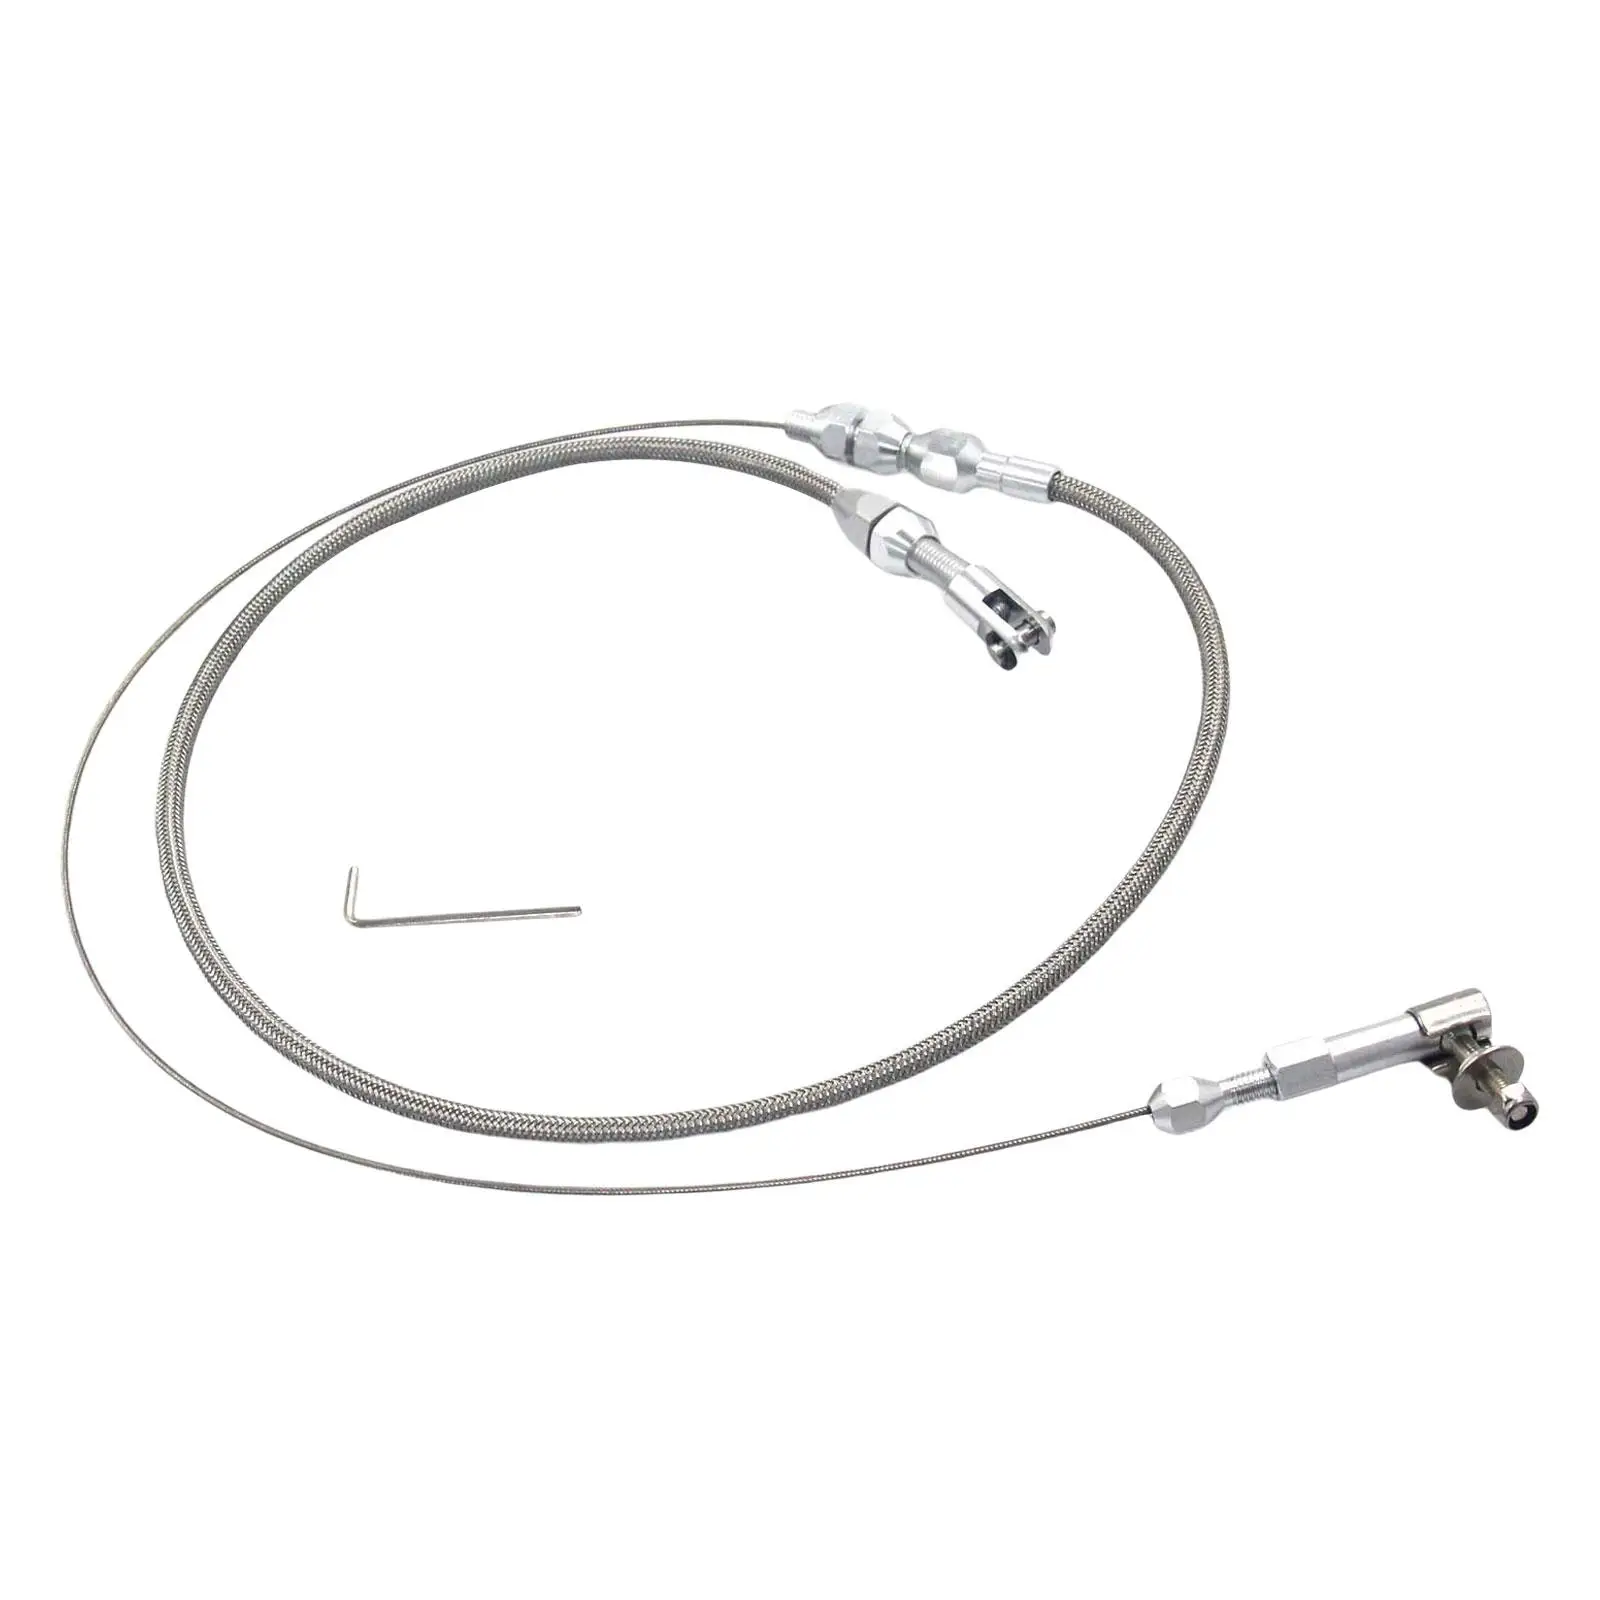 Swap Fuel Line 36inch Easy to Use Premium Engine Accessories Throttle Cable for